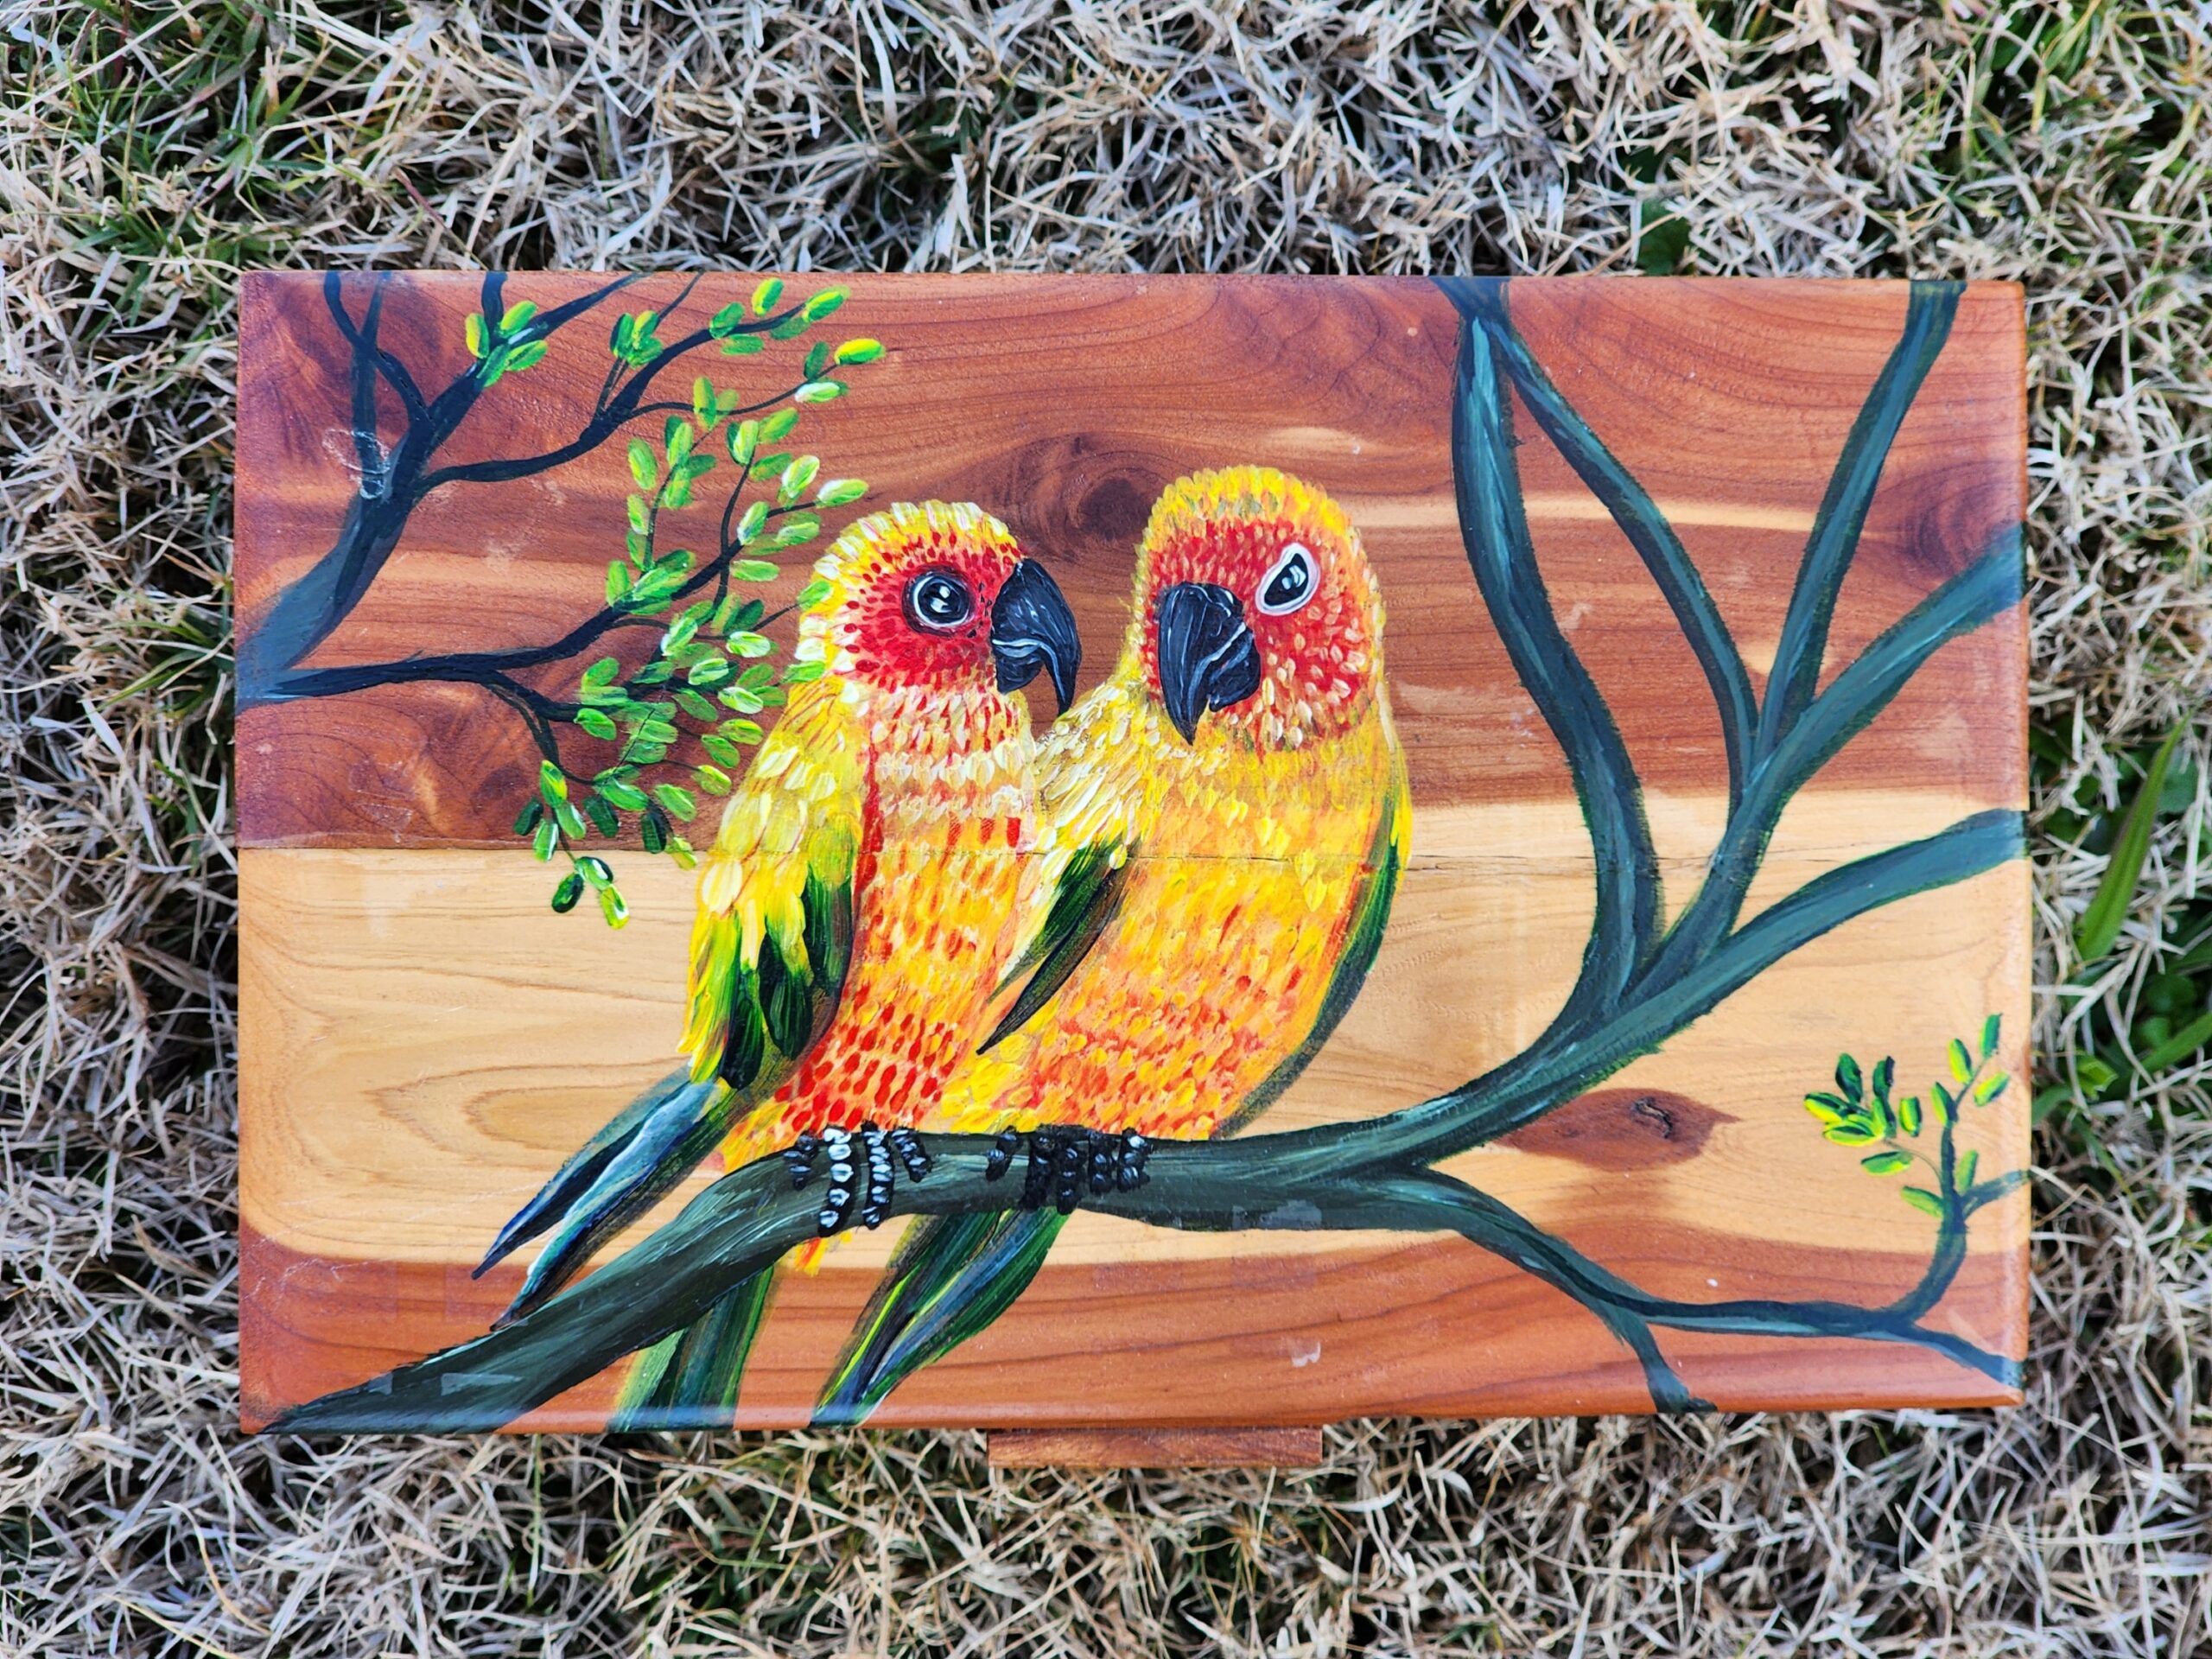 Antique Wooden jewelry box. This box was repurposed into this beautiful jewelry box and handpainted with a colorful pair of love birds.